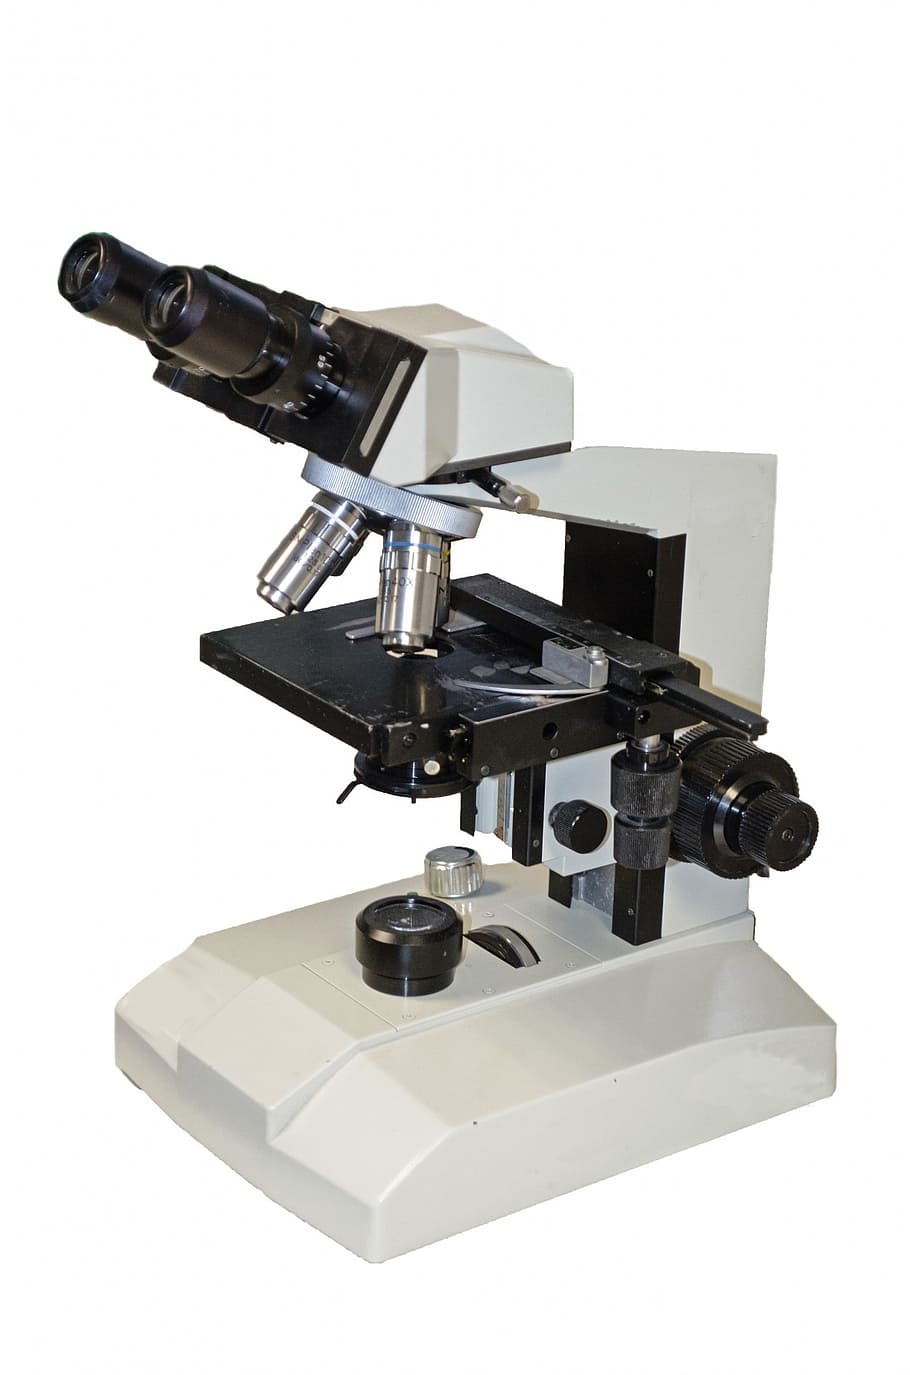 black, white, microscope, chemistry, isolated, microscopy, expensive, cut out, stereo, tool